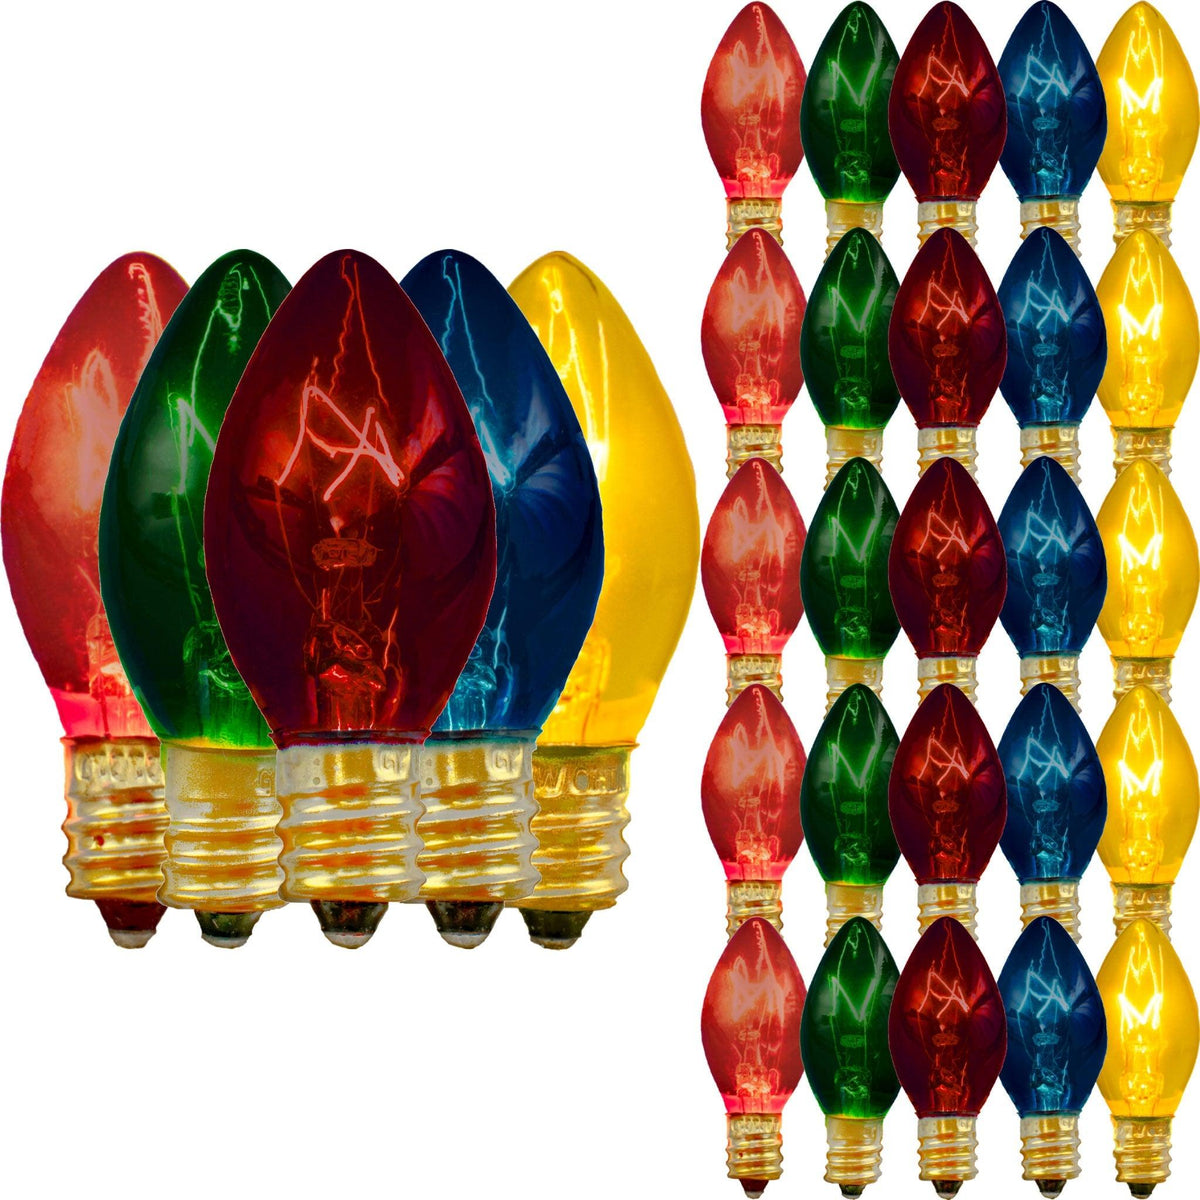 Lee Display offers your favorite Multi-Color Christmas Lights sold with a 25FT Magnetic Patio String Cord in a set